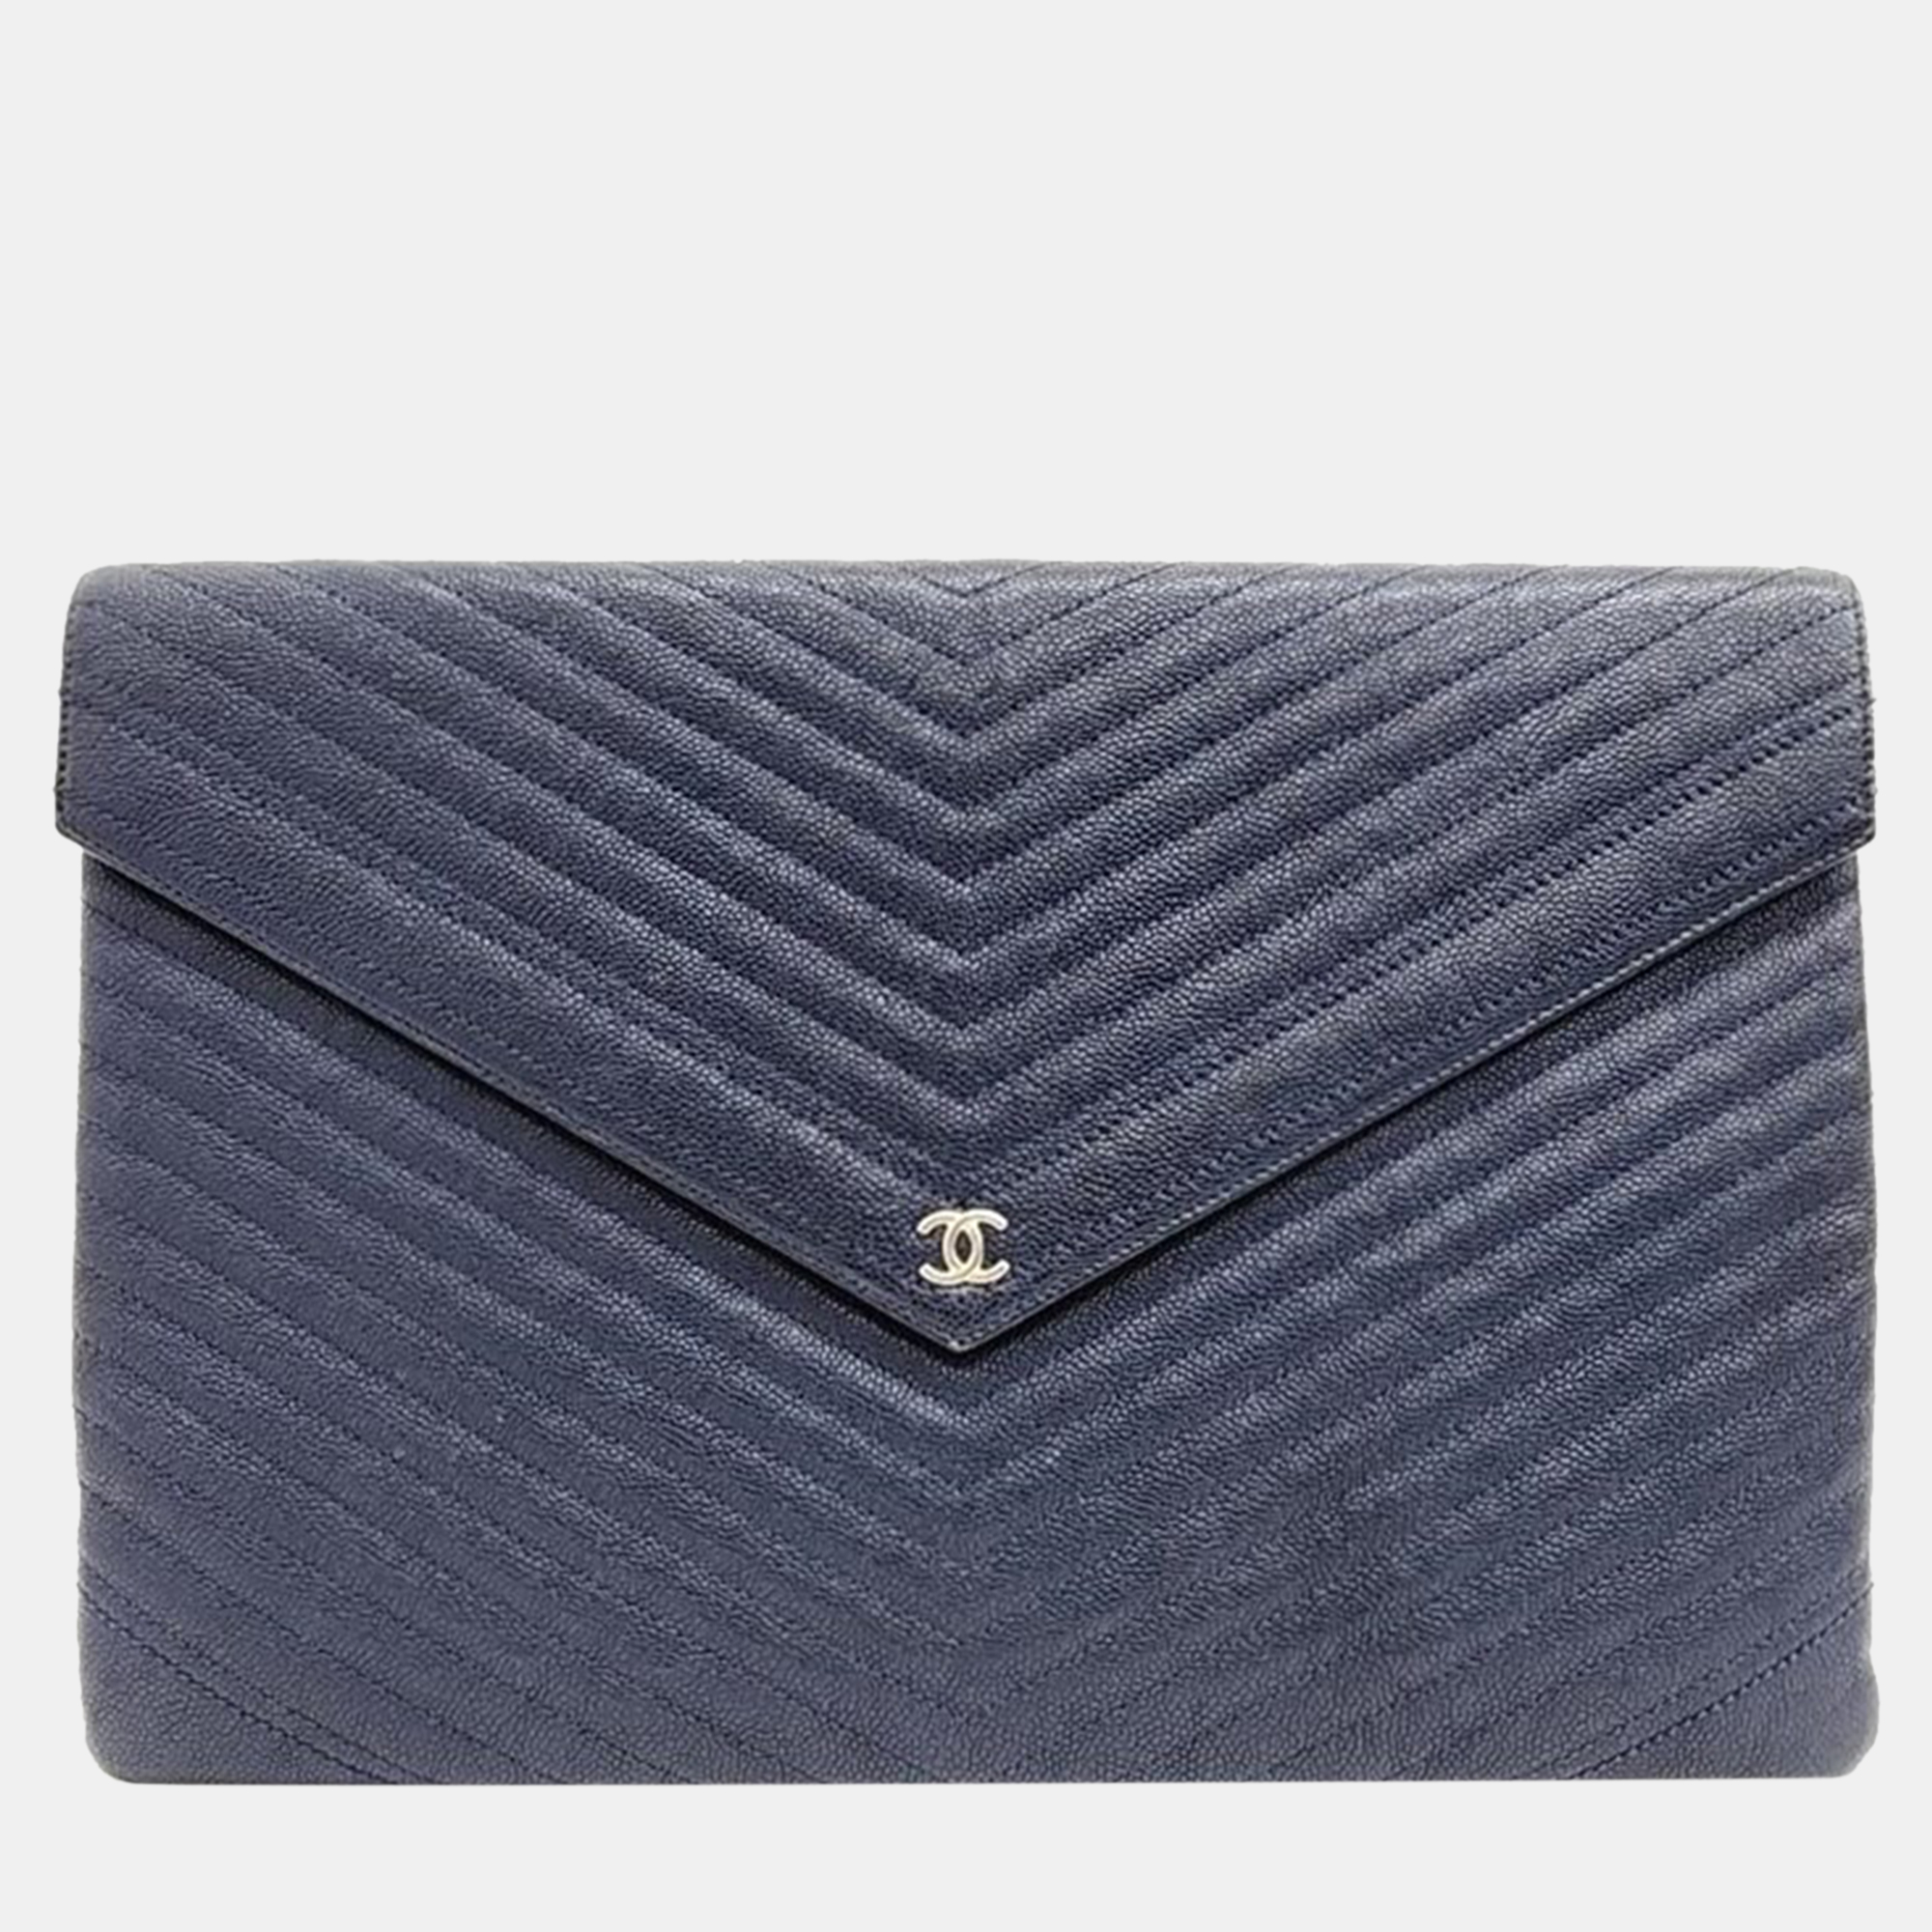 Chanel blue calfskin chevron quilted small envelope clutch